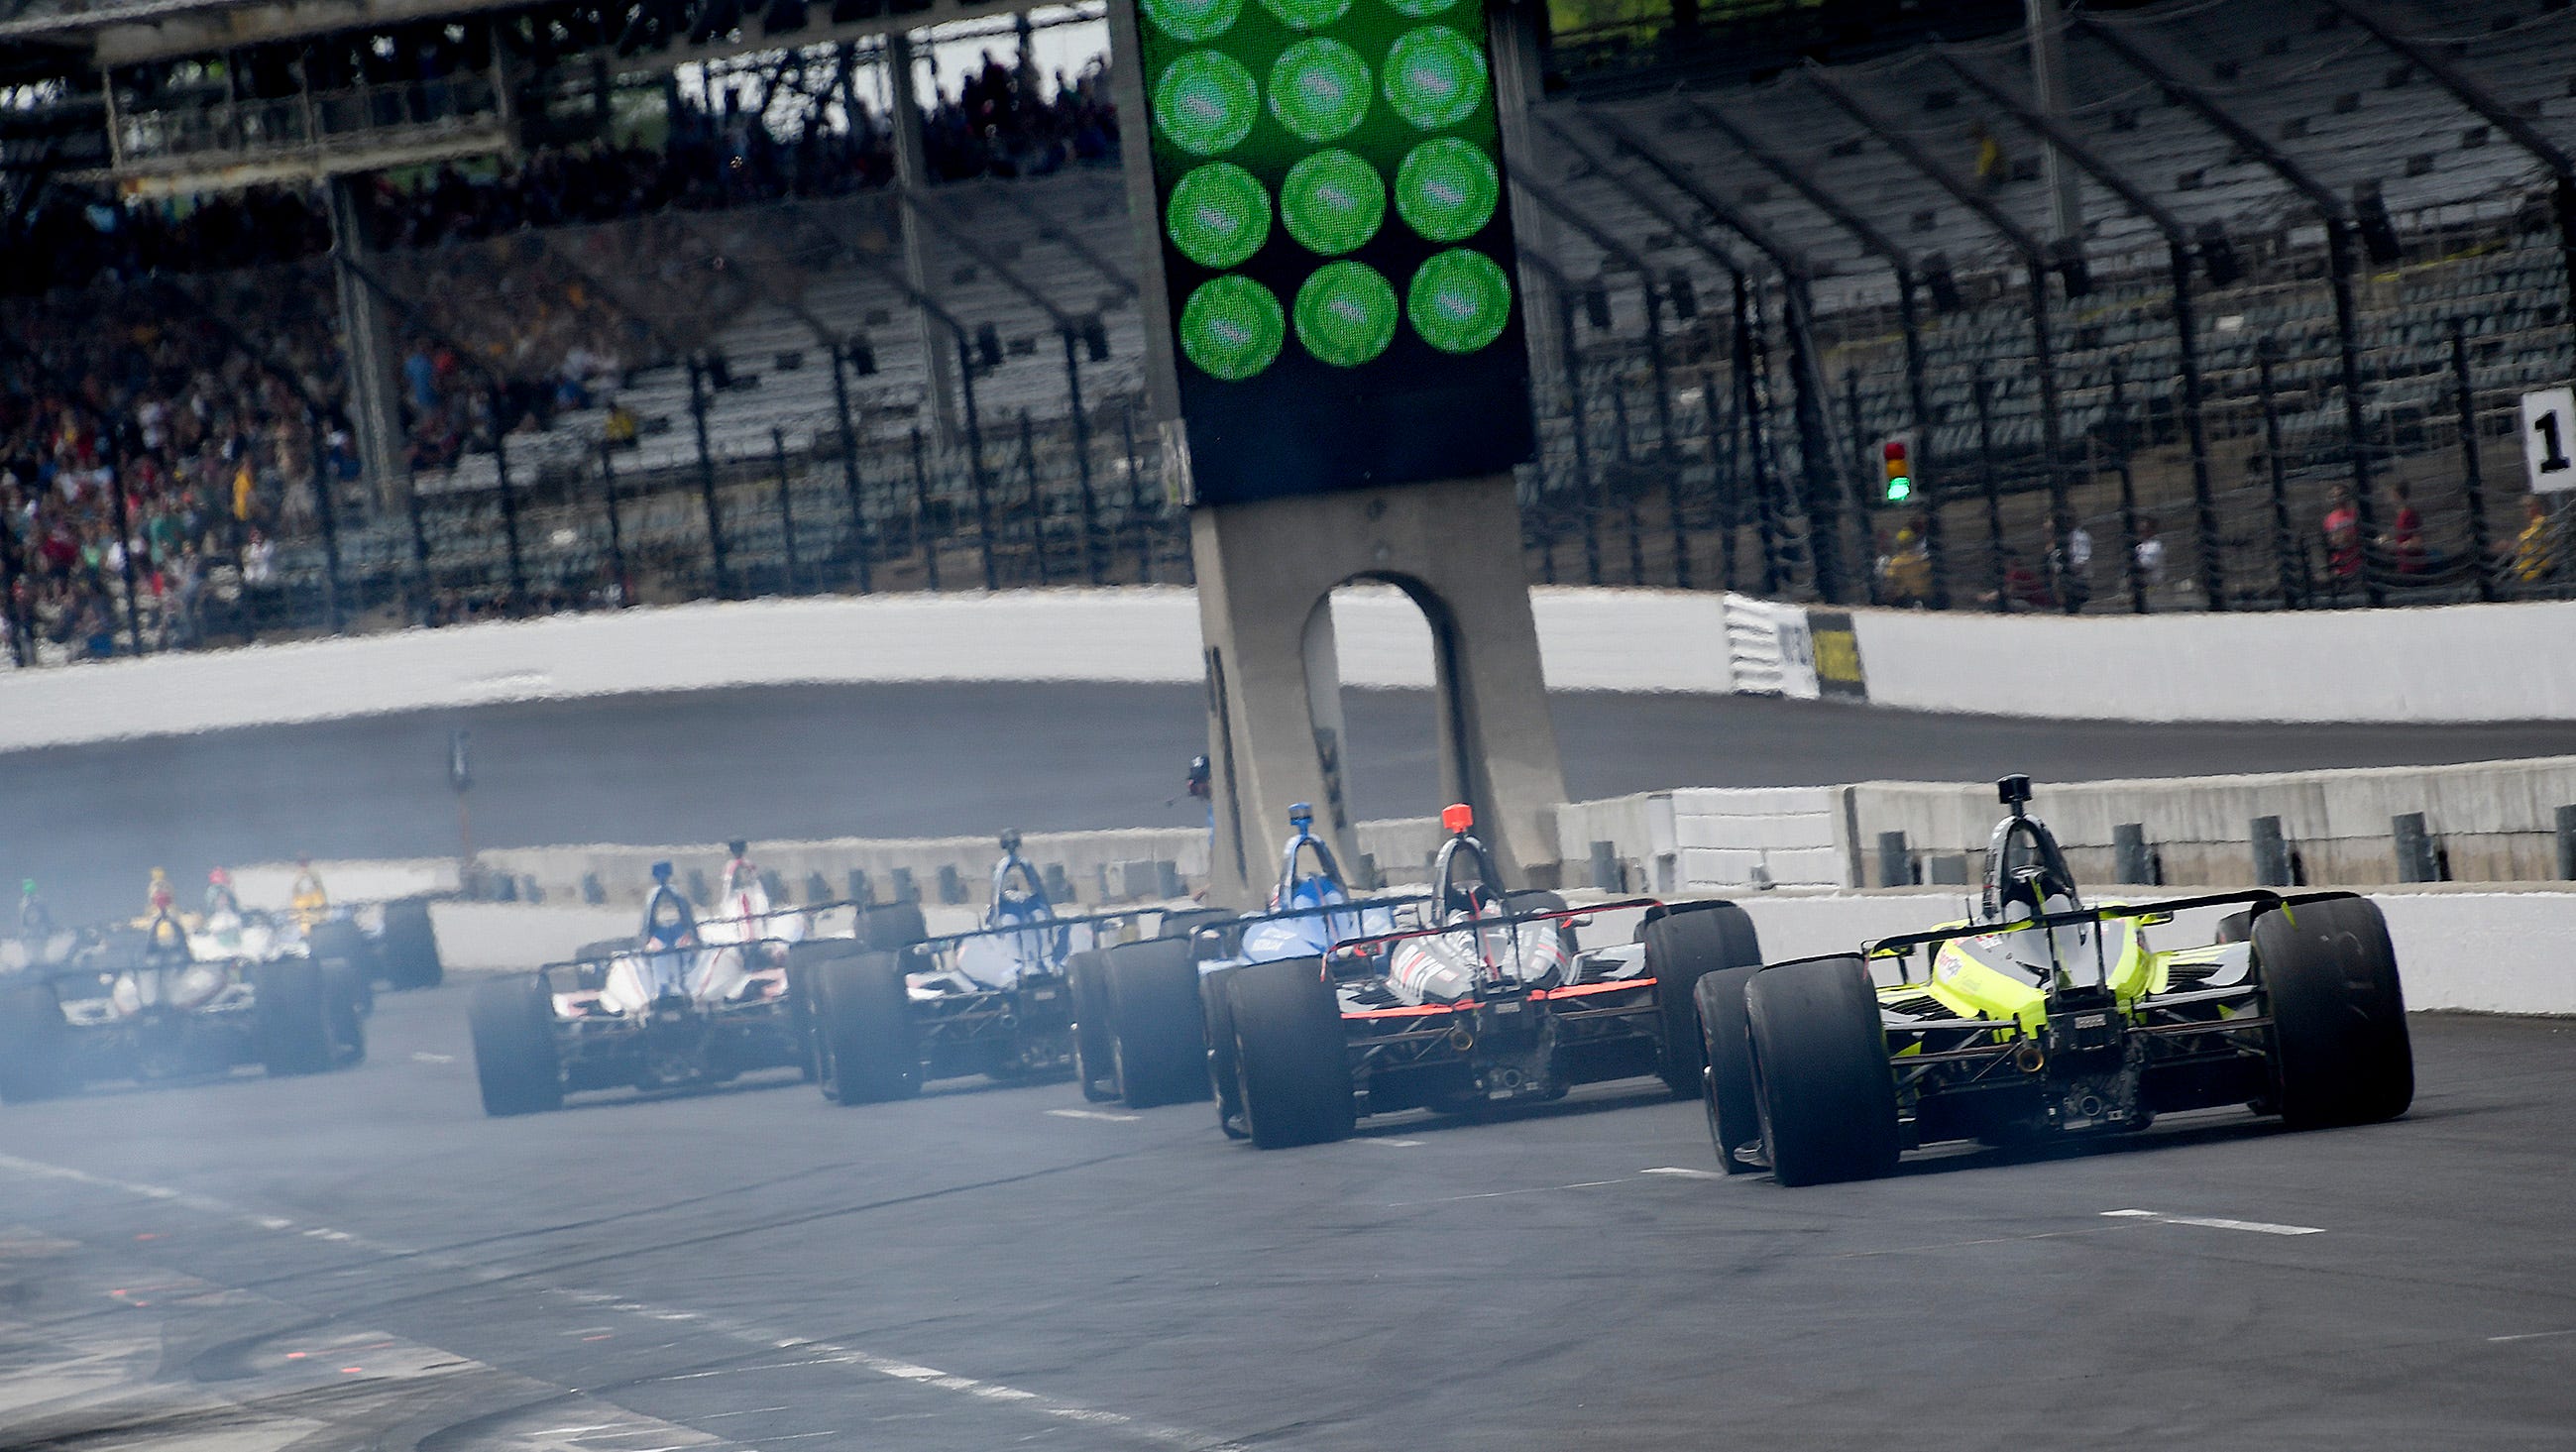 Indy 500 Carb Day 2020 at IMS: Pato O'Ward turns in fastest lap